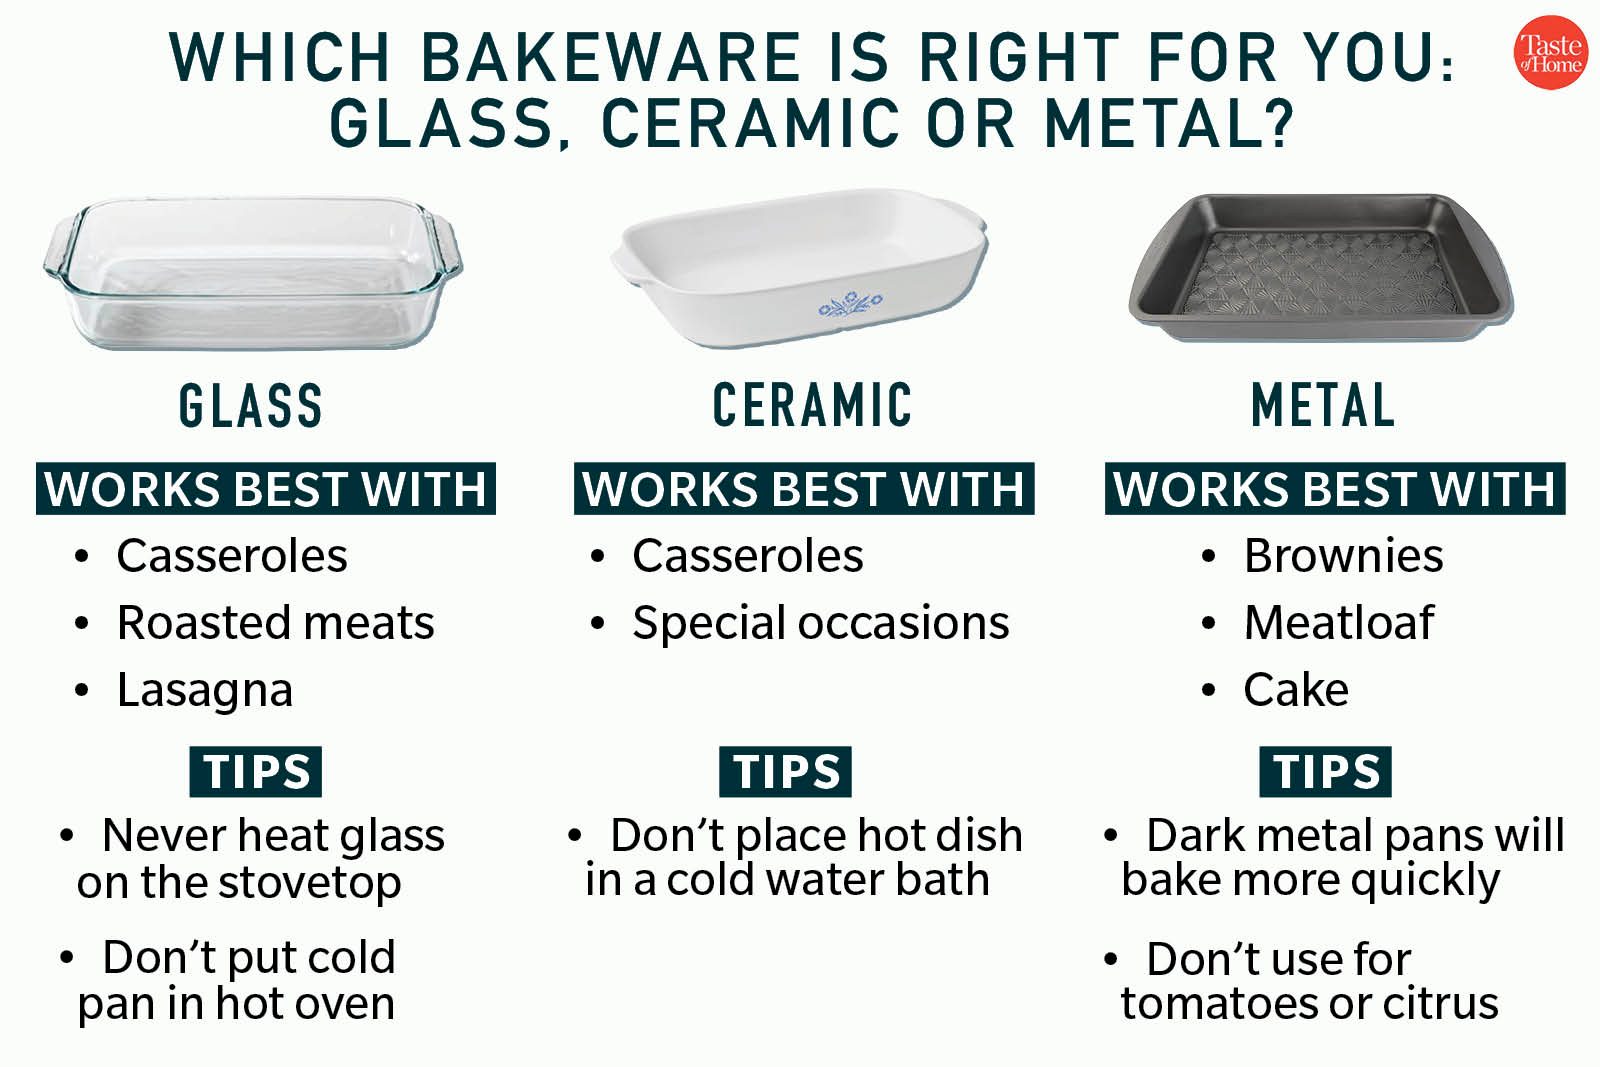 What brand of baking ware do you use? Or which do you recommend